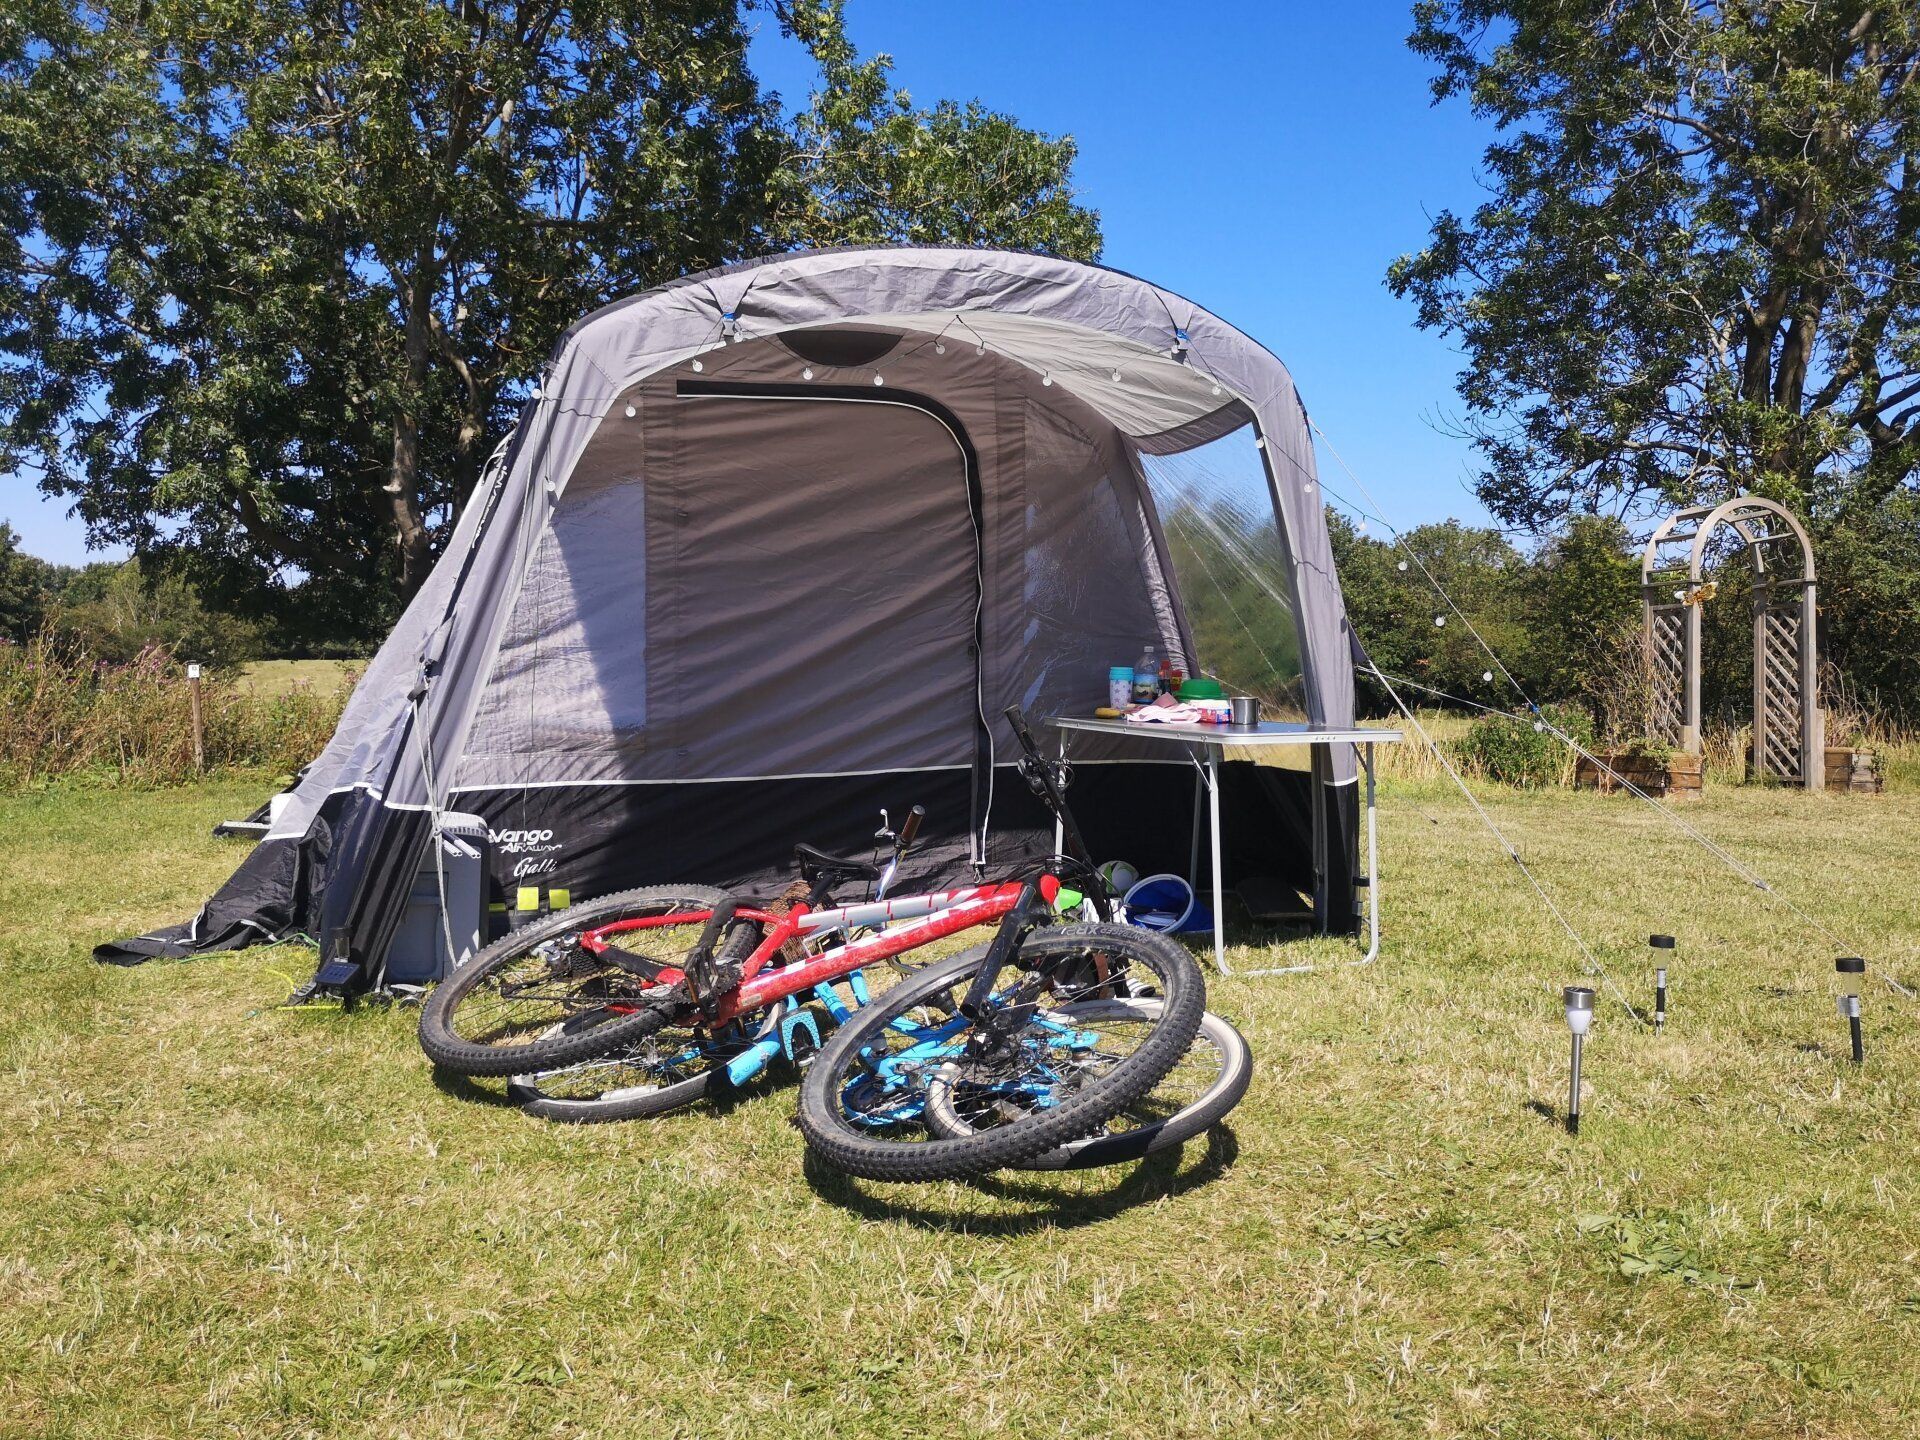 Campsite at the Three Horseshoes, Lincolnshire